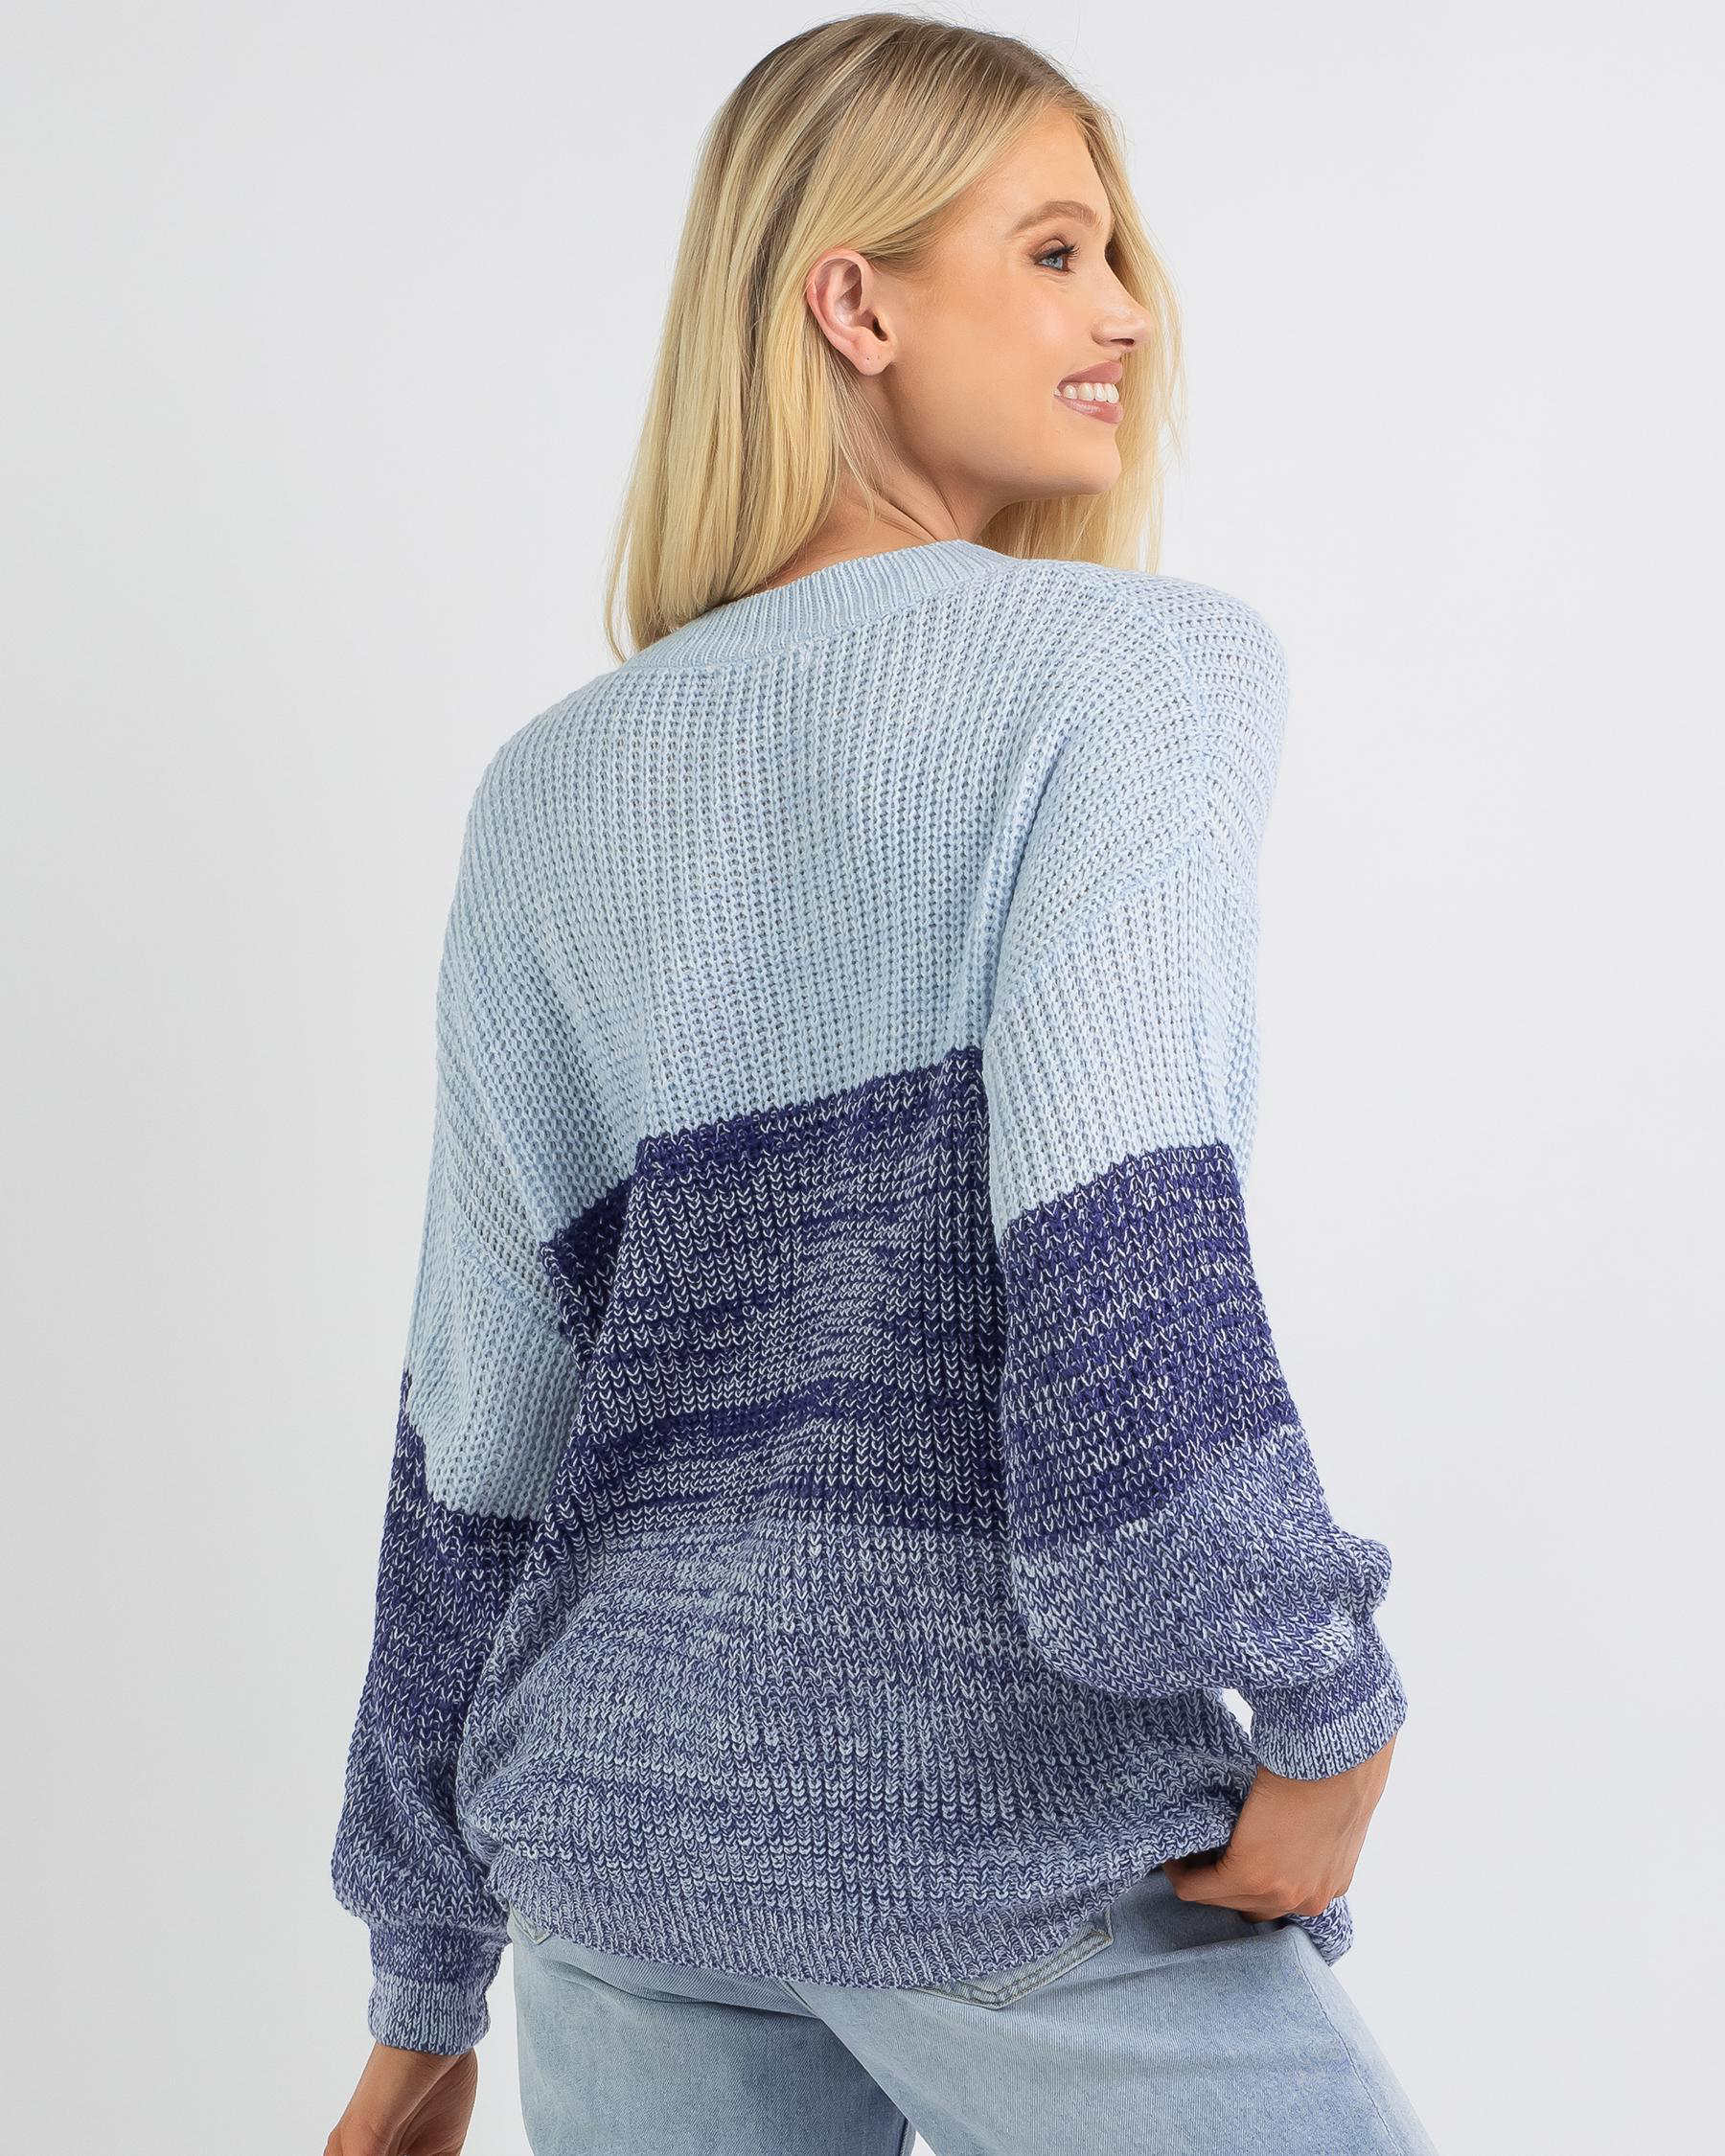 Label Of Love Blue Mountains Knit Jumper In Blue - Fast Shipping & Easy ...